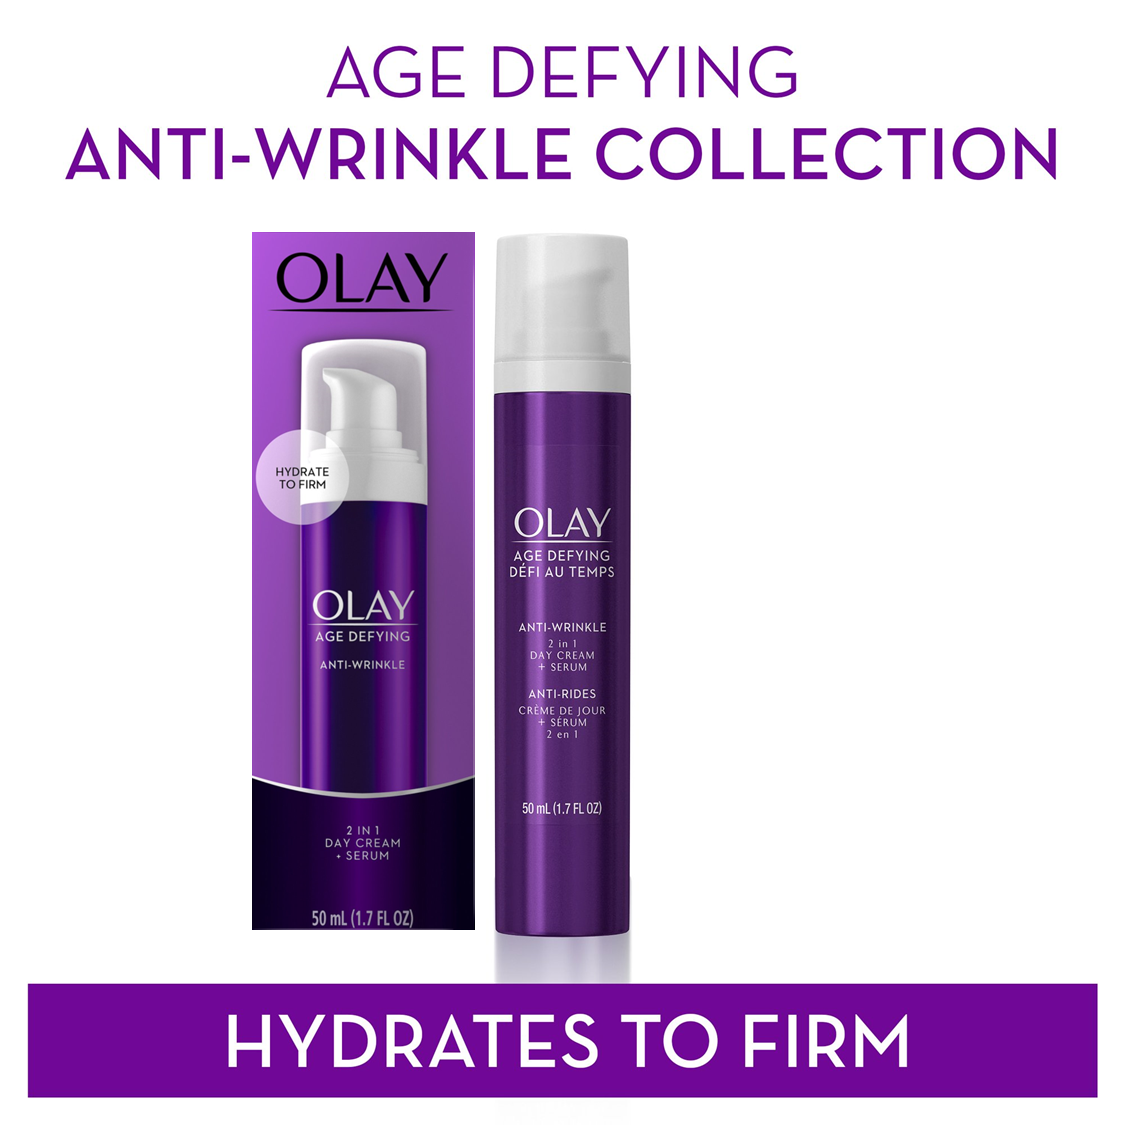 Olay Age Defying 2 in 1 Day Cream Plus Serum, Anti-Wrinkle, All Skin Types, 1.7 oz - image 1 of 9